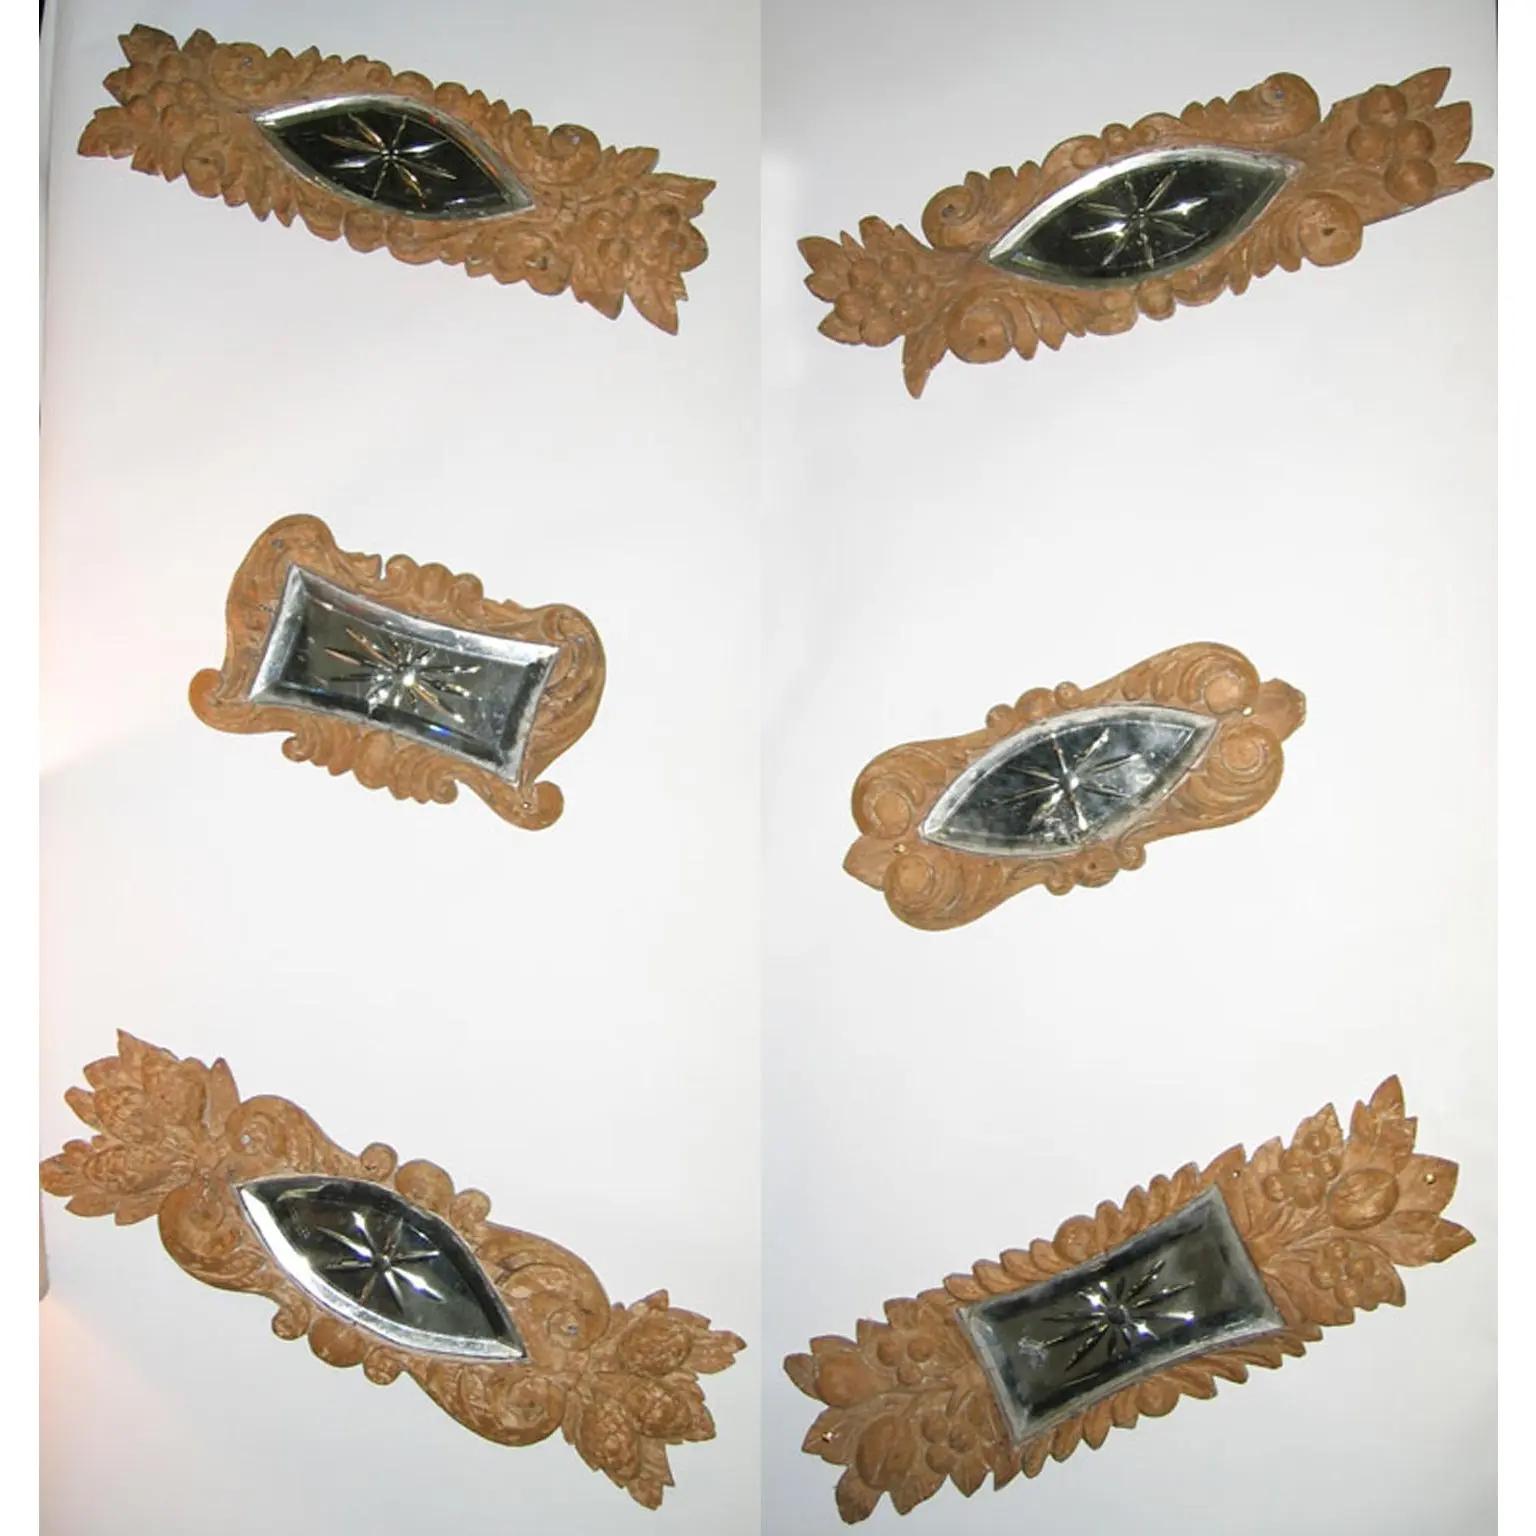 Carved Wood, Mirror Architectural Ornament Sculpture, 8 pc, Early 20th Century For Sale 8